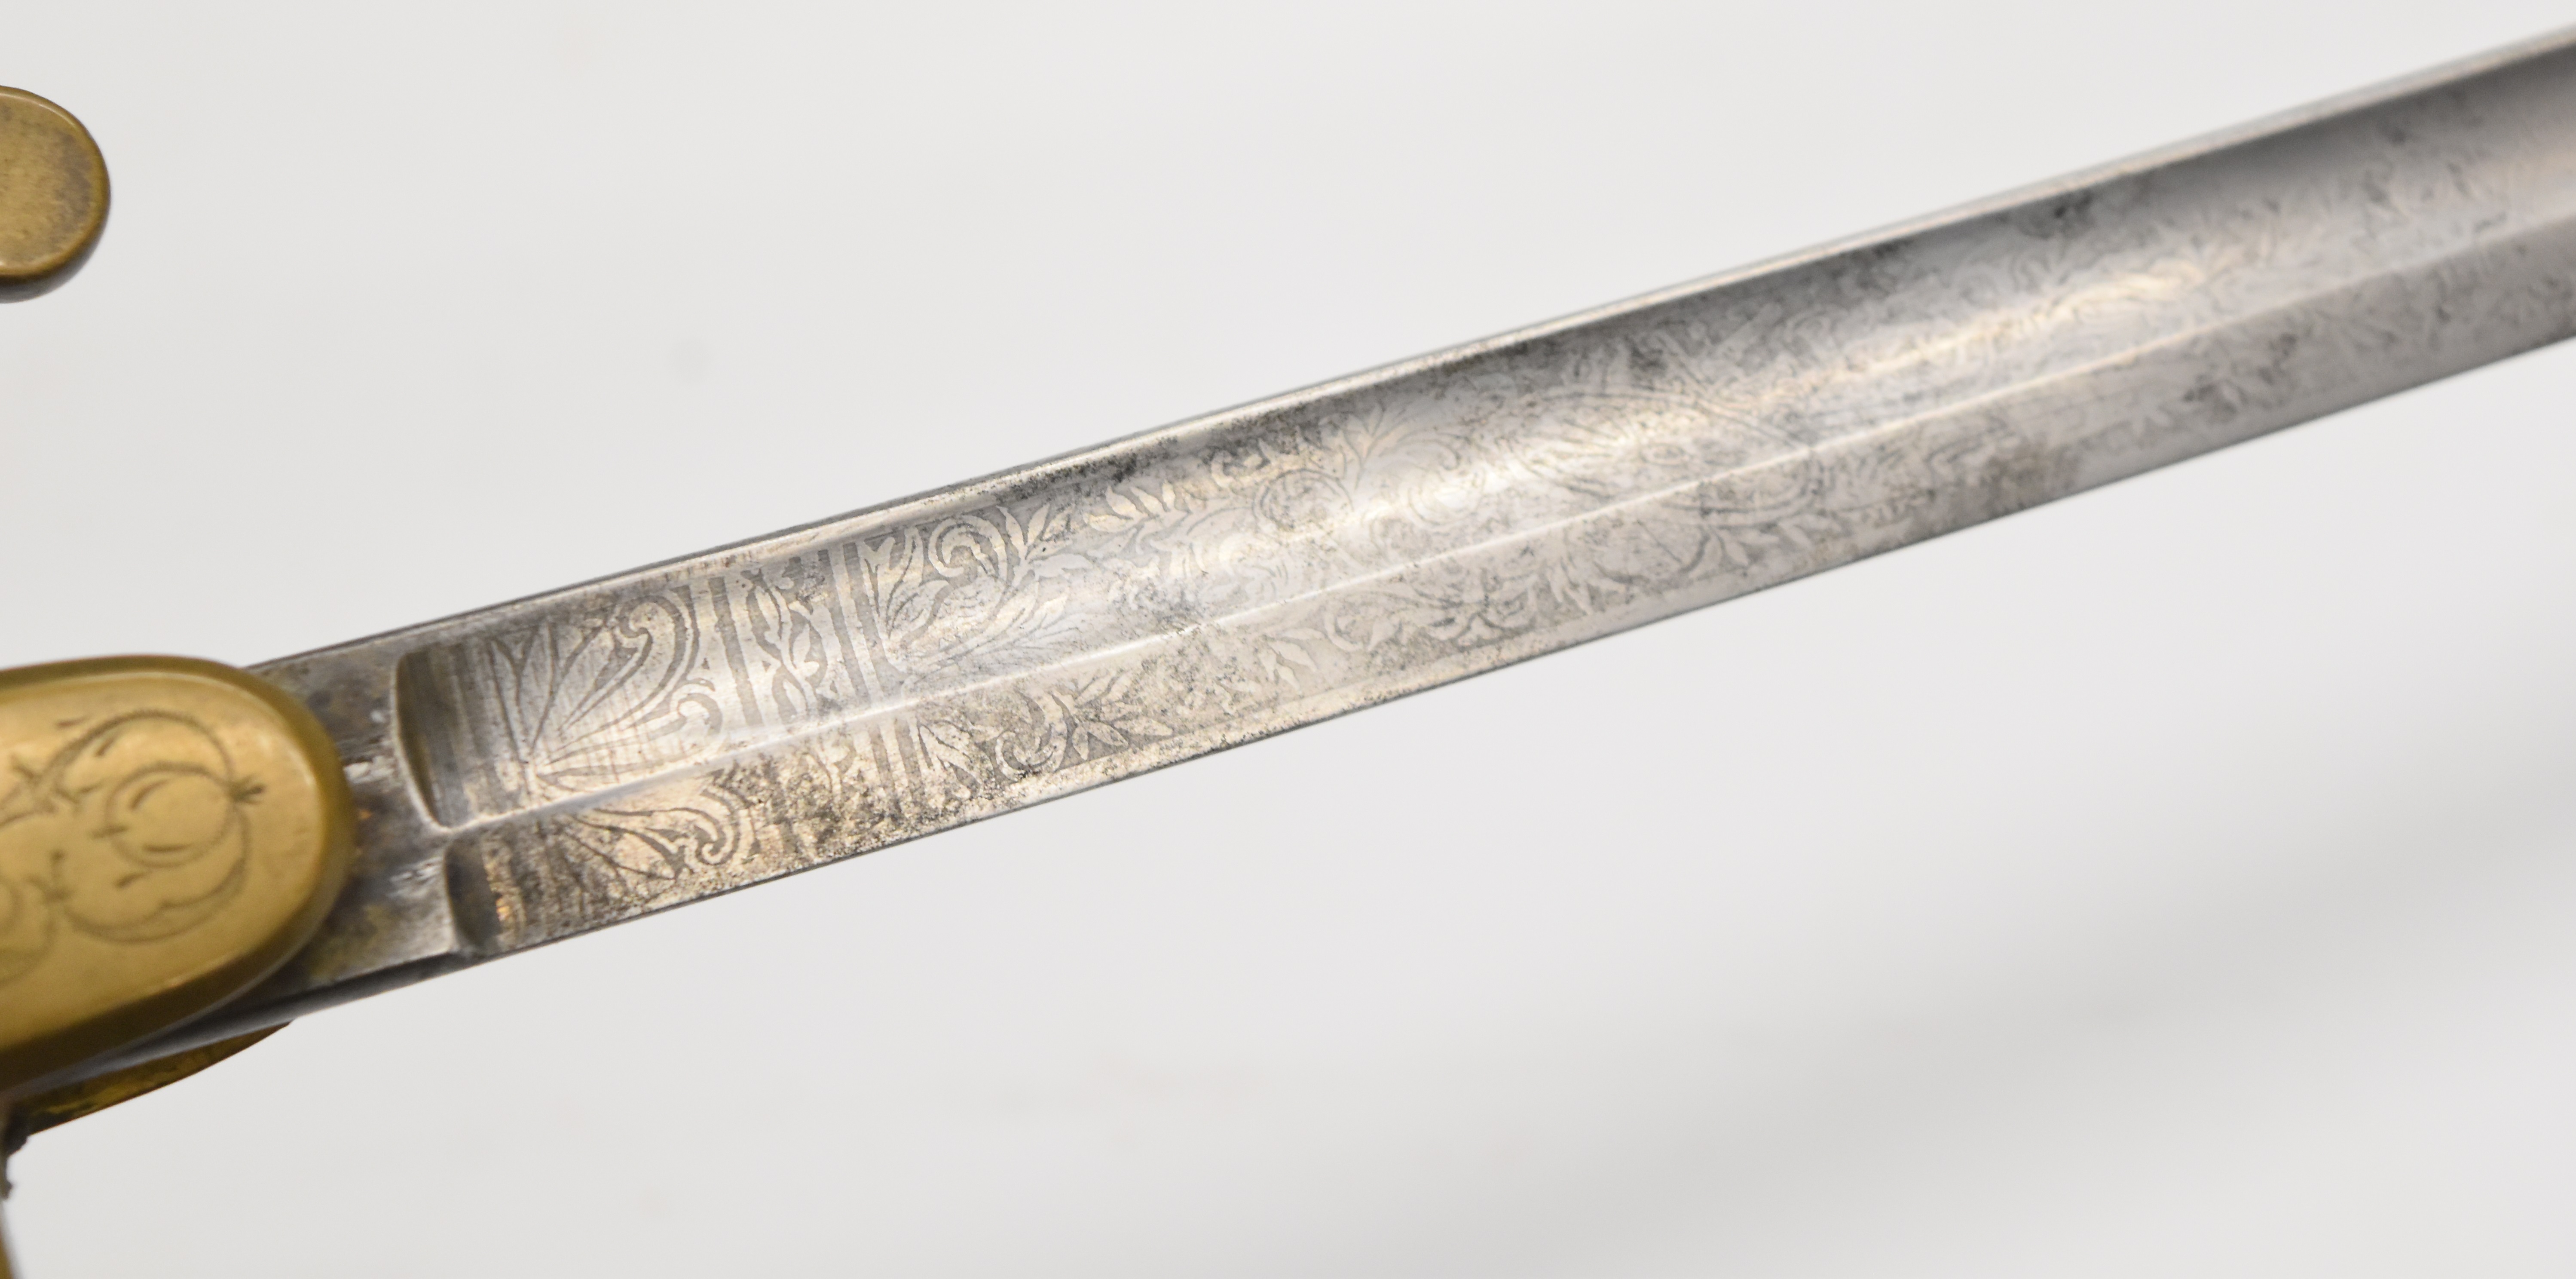 Prussian Artillery Officer's sword with stirrup hilt, shagreen grip, 80cm decorated blade and - Image 7 of 11